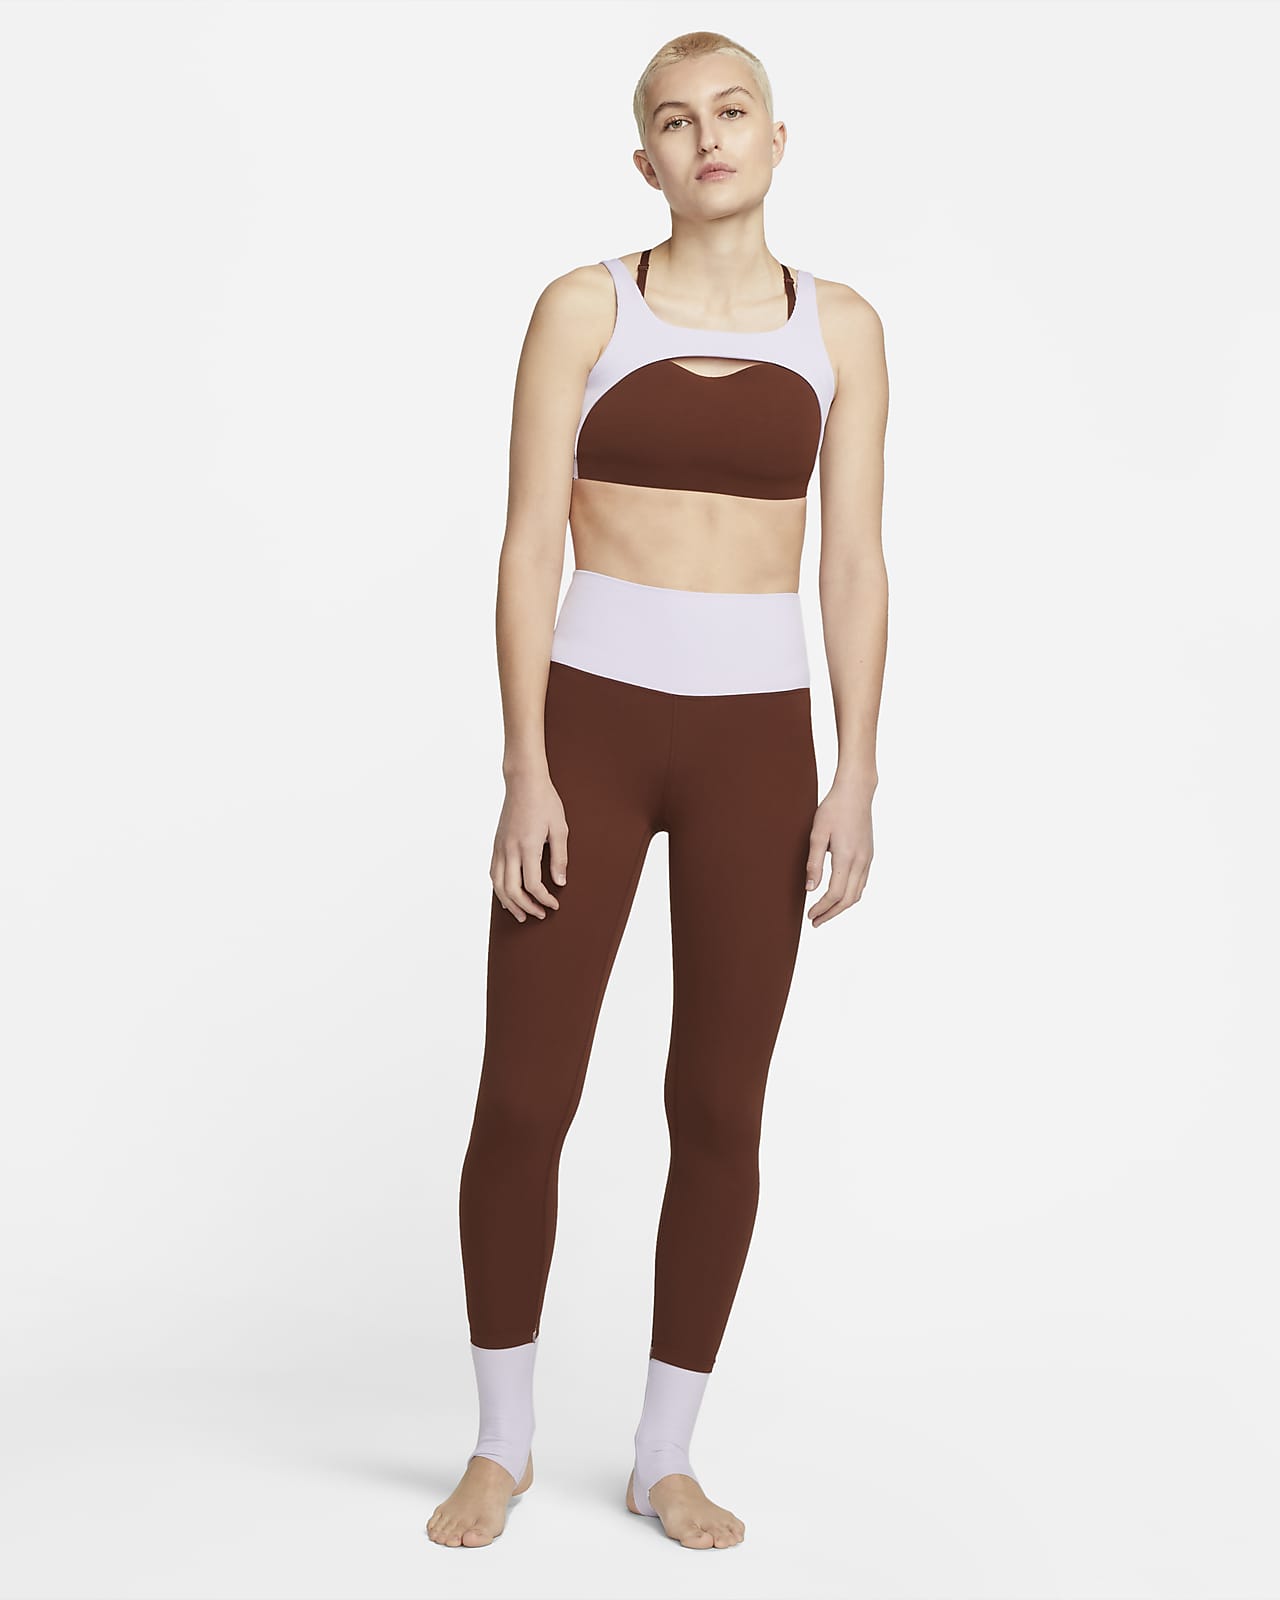 Nike Yoga Adv Indy Seamless light support sports bra in off white and mint